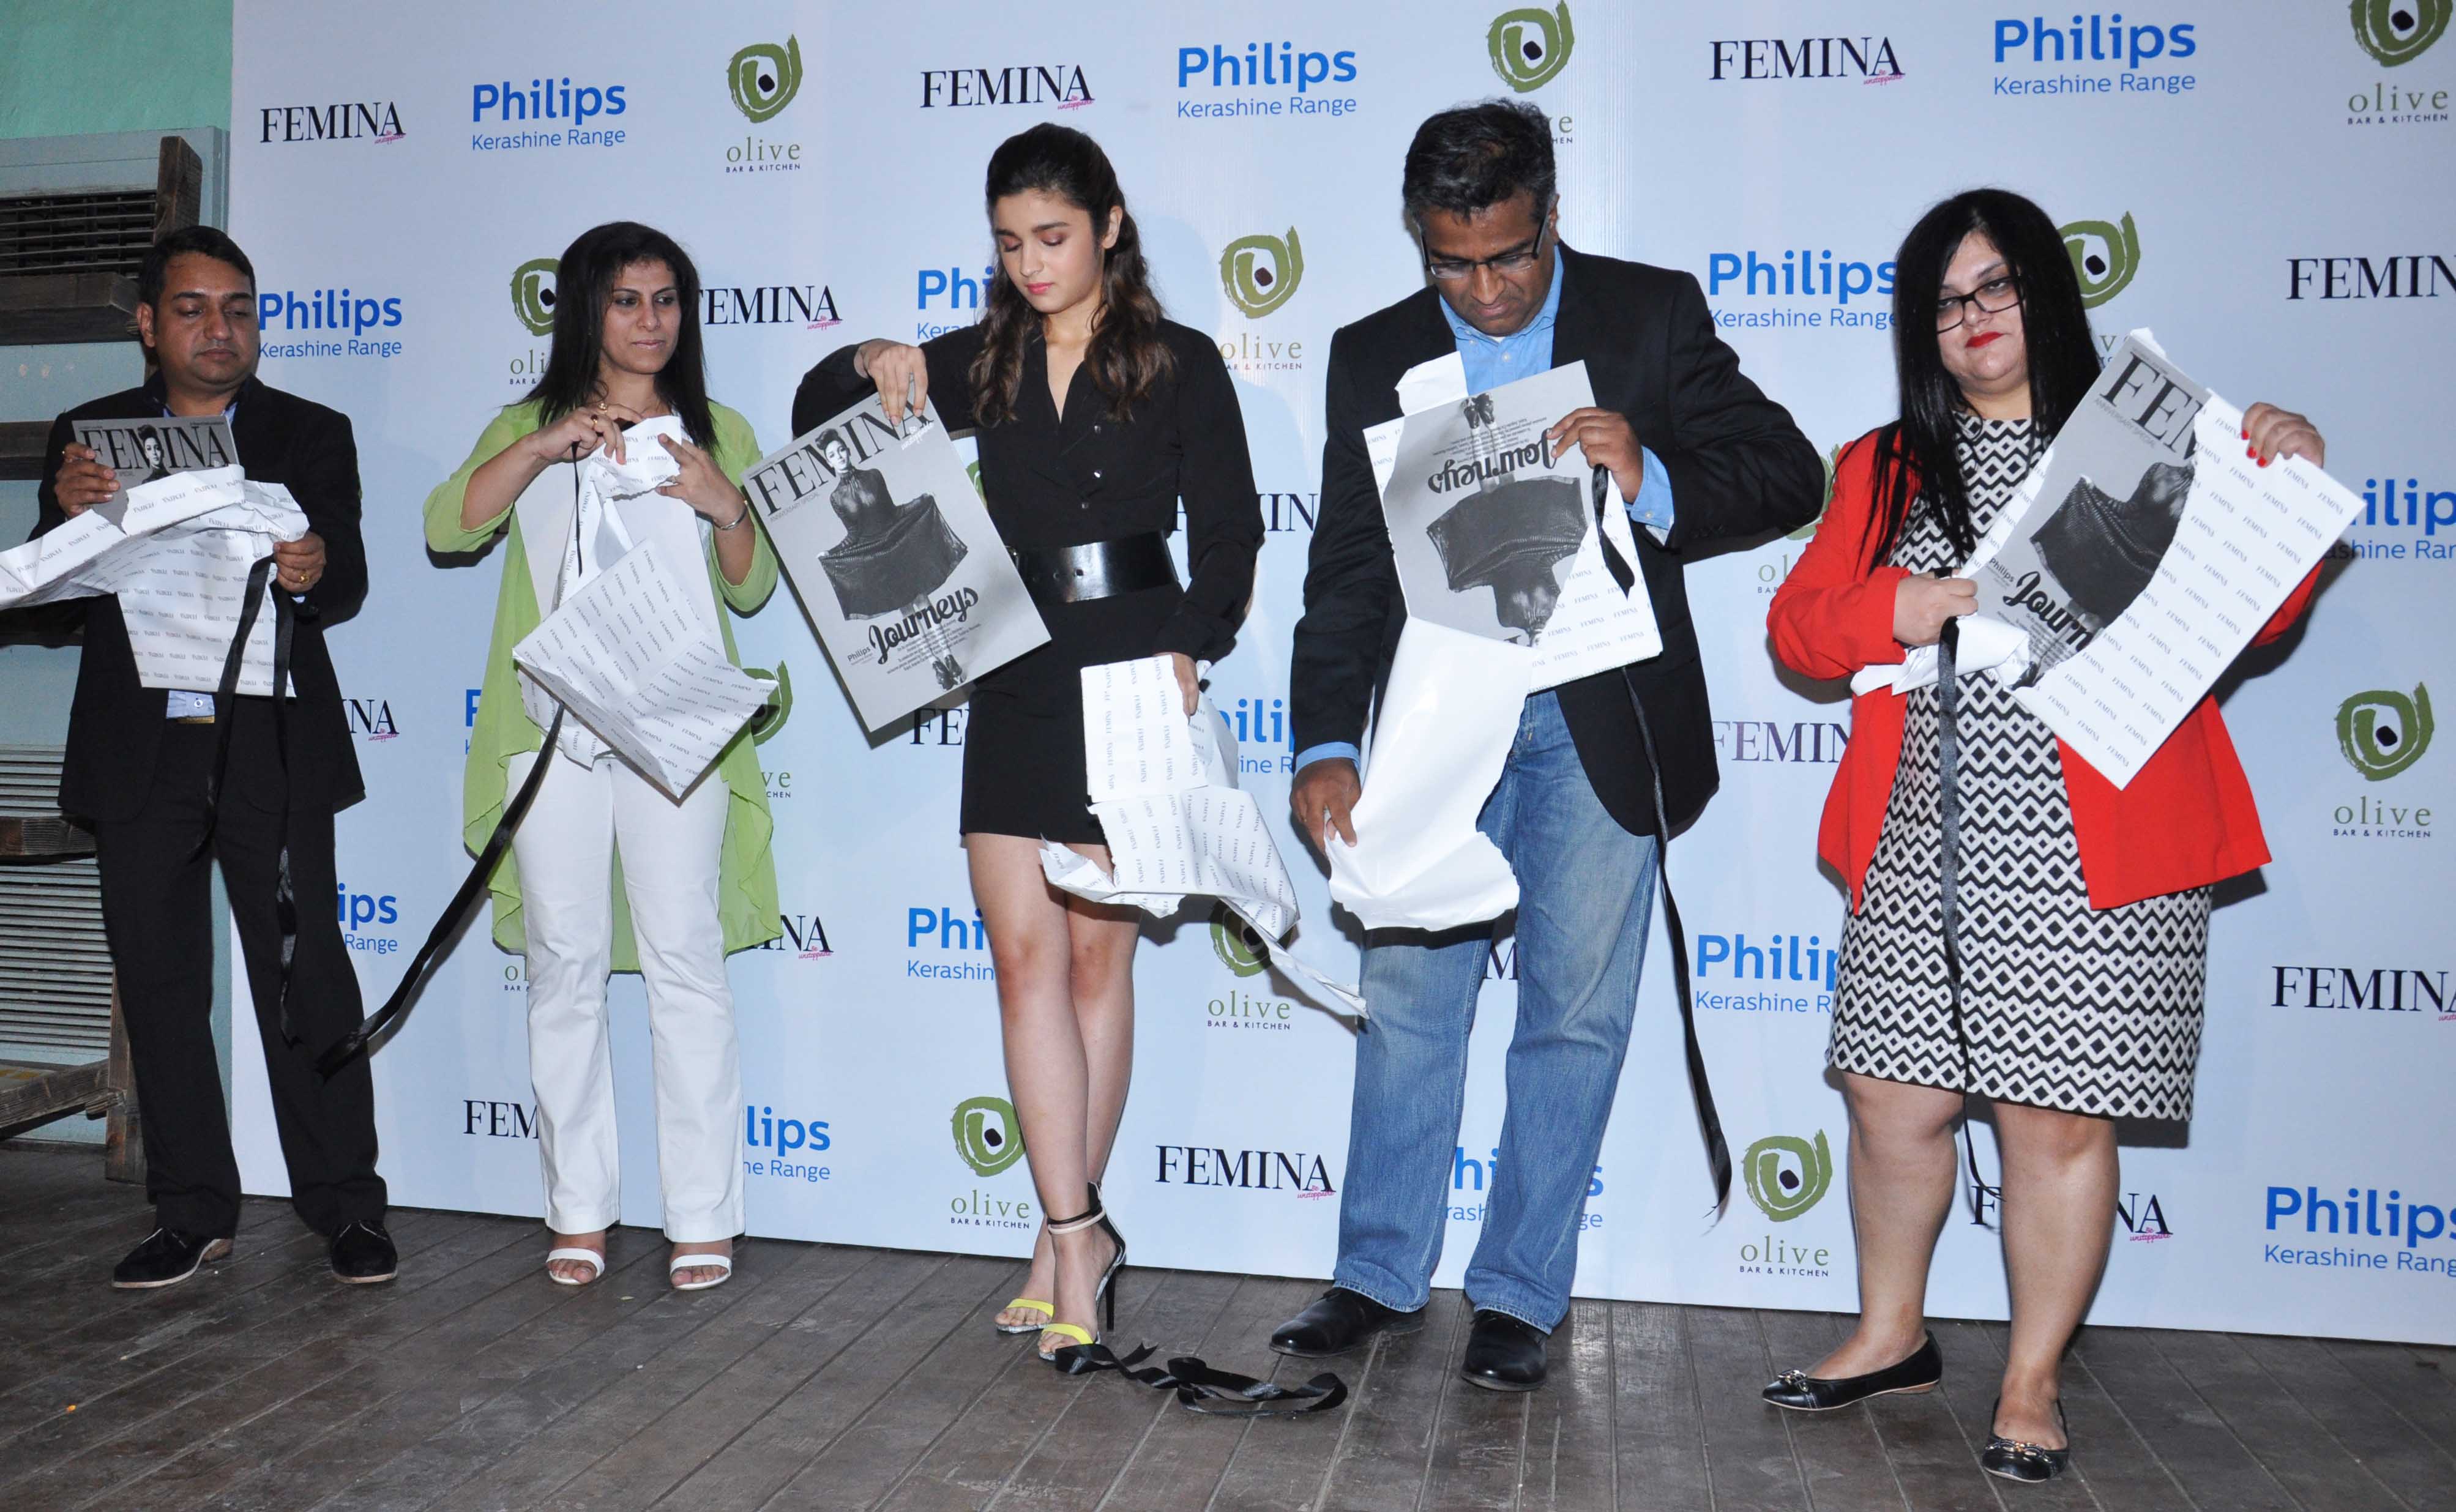 Alia Bhatt graced the cover launch of Feminas 55th Anniversary issue at Guppy by Olive